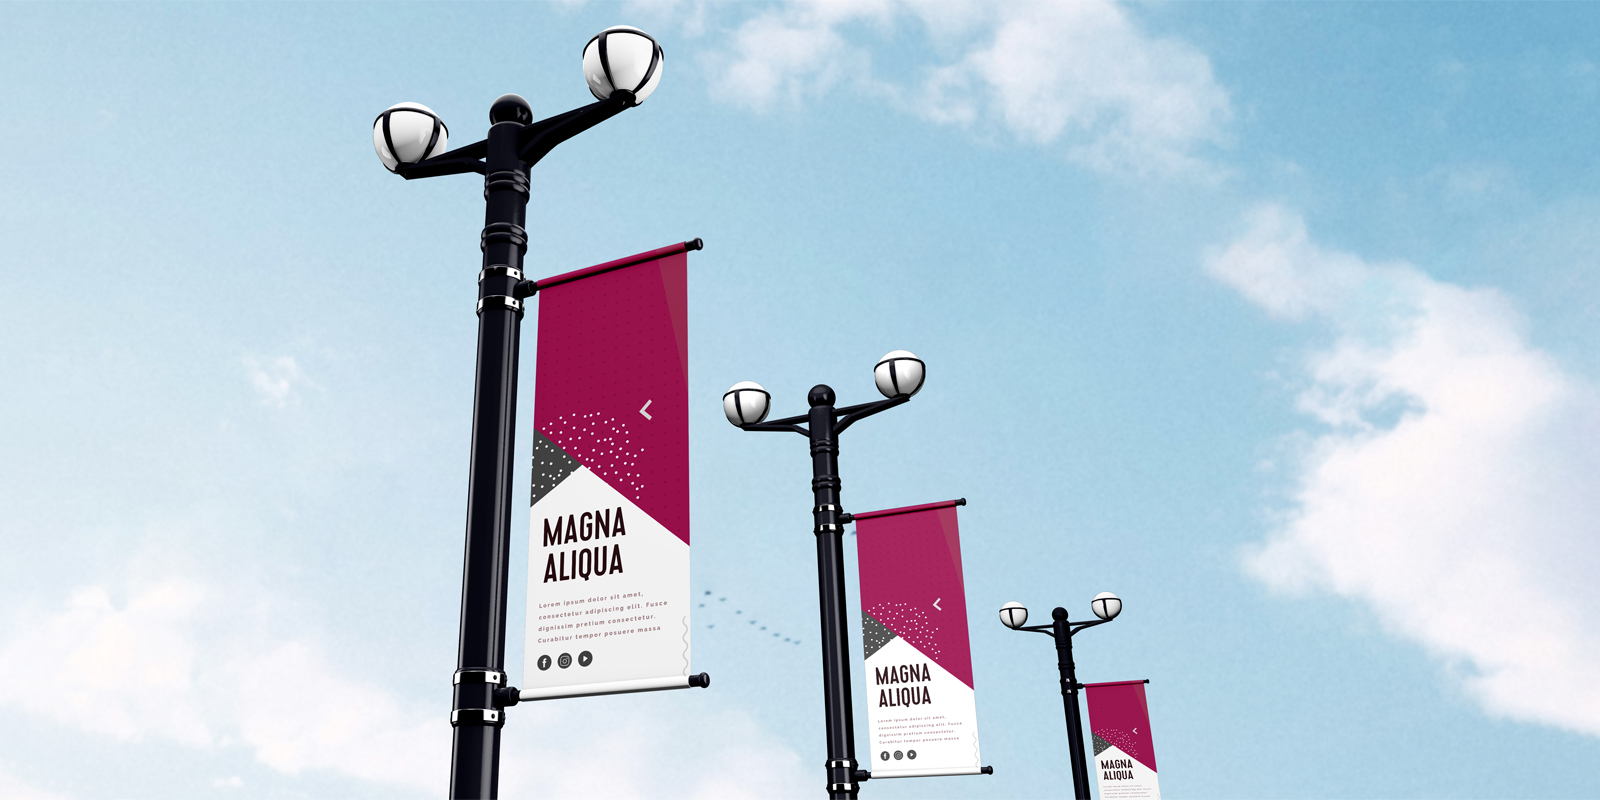 Pole banners in Bendigo - Print with Pagerr